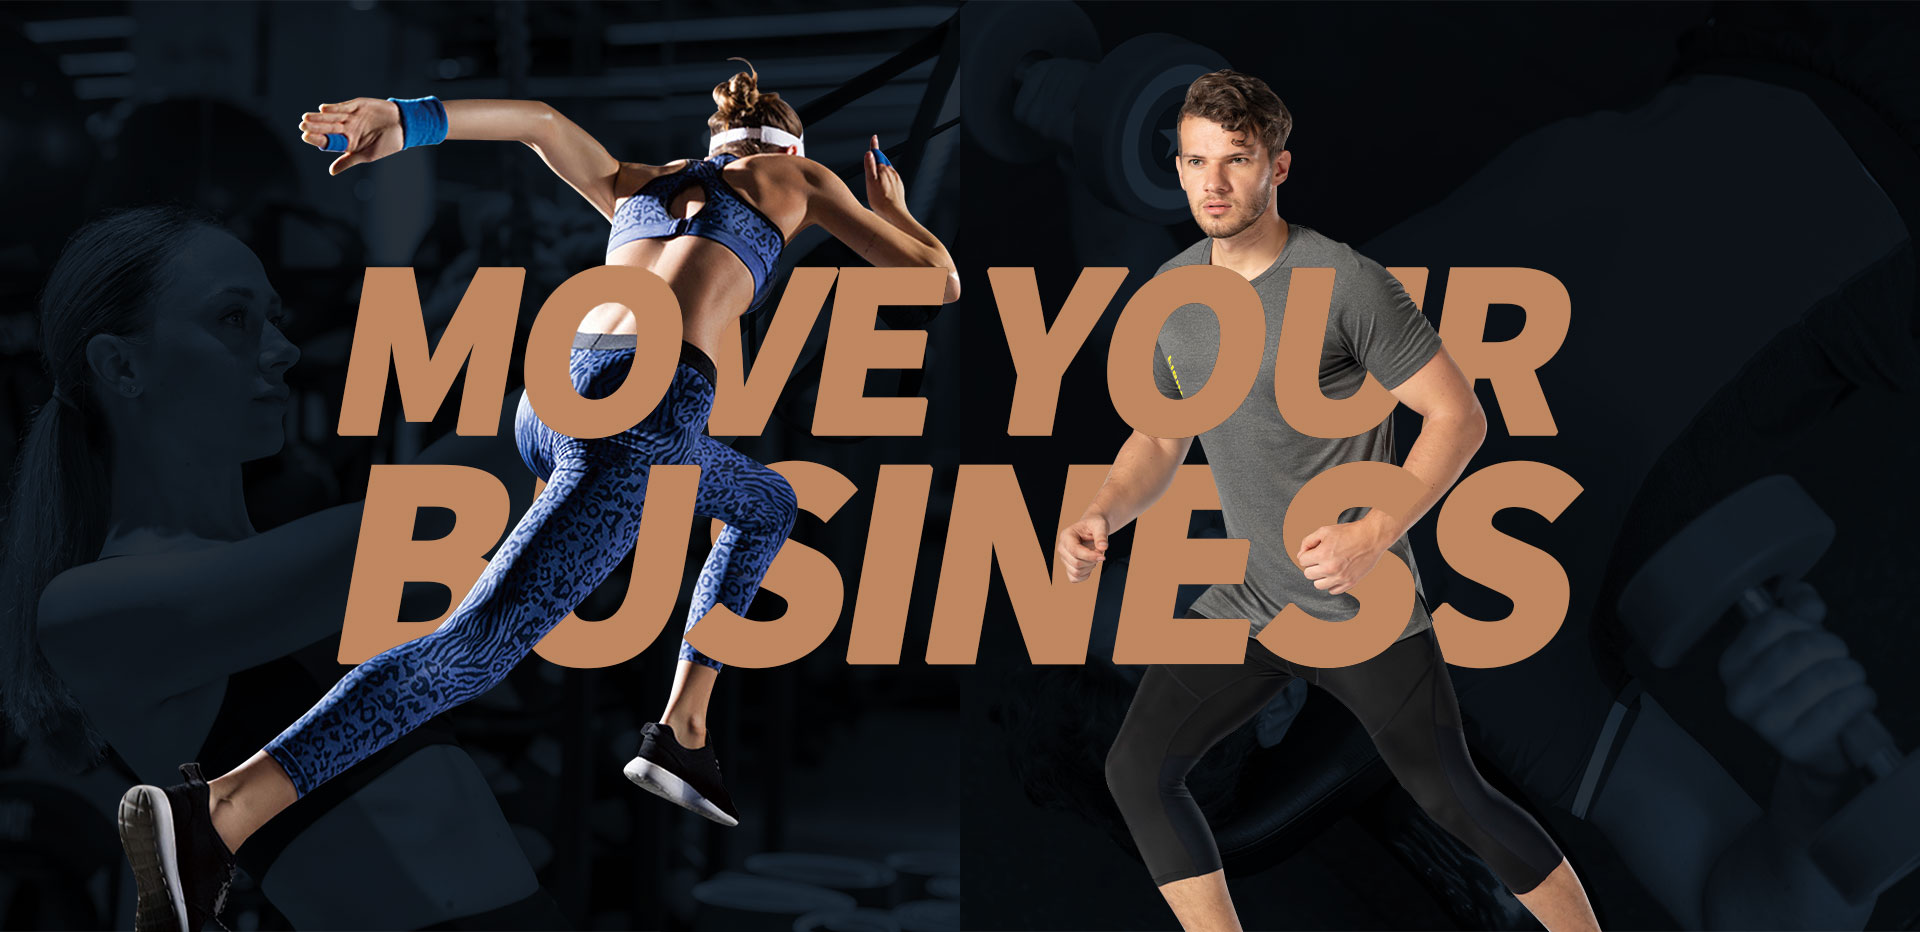 MOVE-YOUR-BUSINESS1